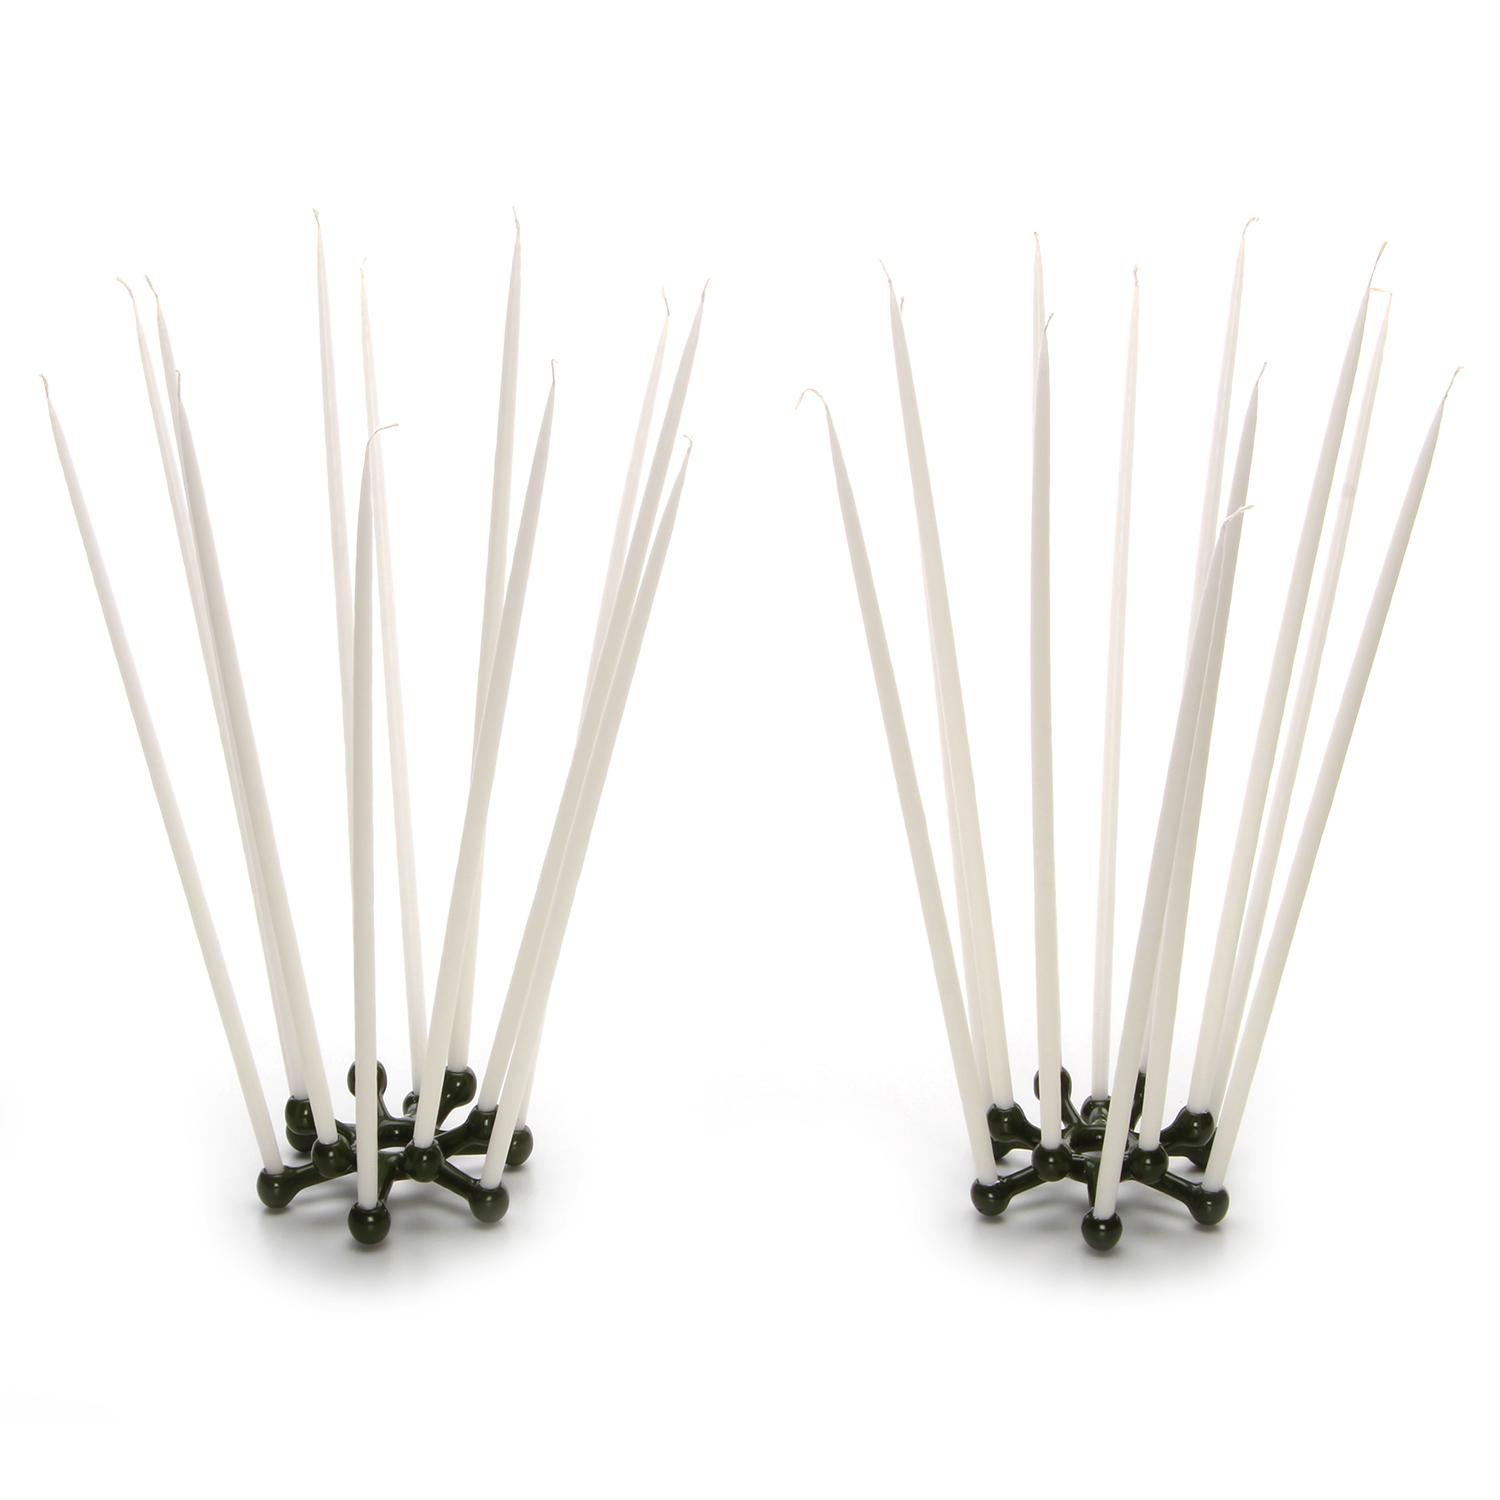 Enameled Spider (pair) rare tiny taper holders by Jens Quistgaard for Dansk Designs in 1963. Ultra-rare Mid-Century Modern cast iron candle holders for tiny tapers, each fit 12 candles!

The Spider is a candleholder for up to 12 tiny tapers